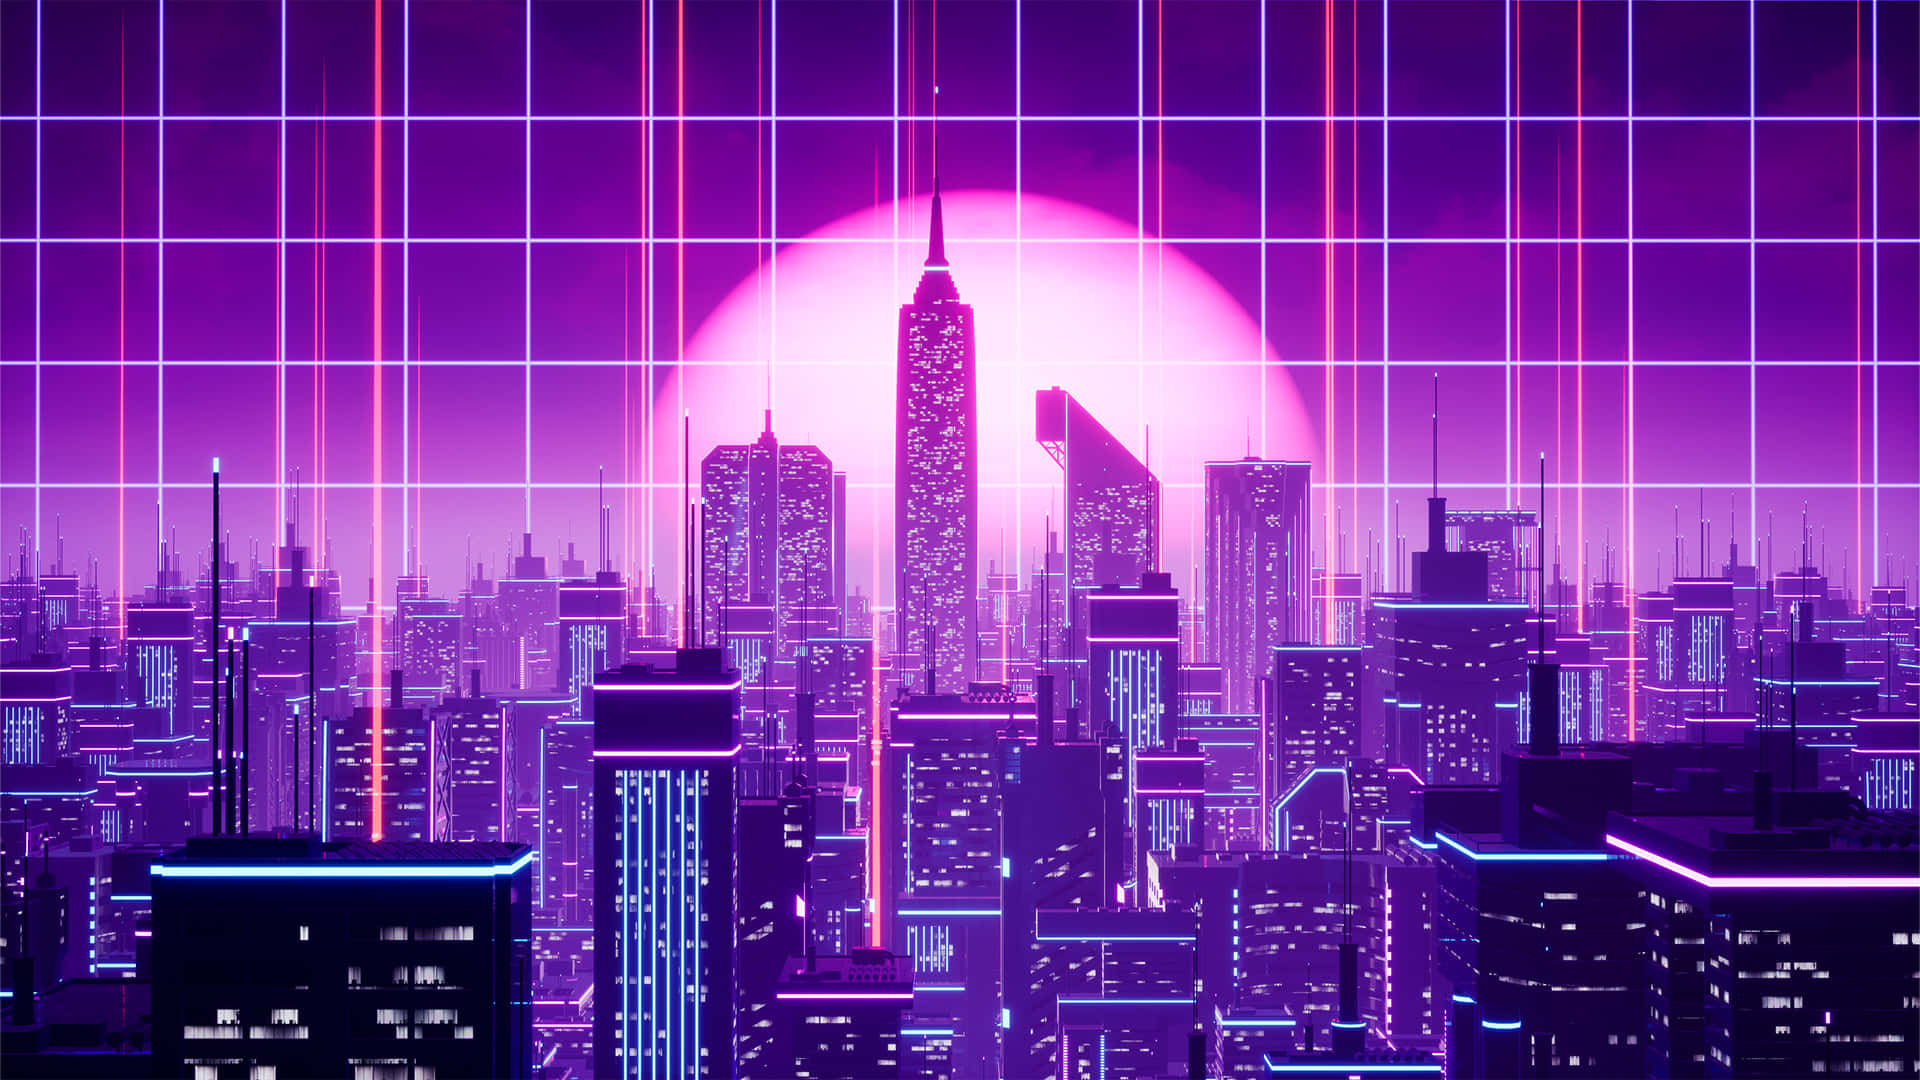 "Welcome to Synthwave City, where the sights are breathtaking, the sounds are dreamy, and the atmosphere is electric." Wallpaper